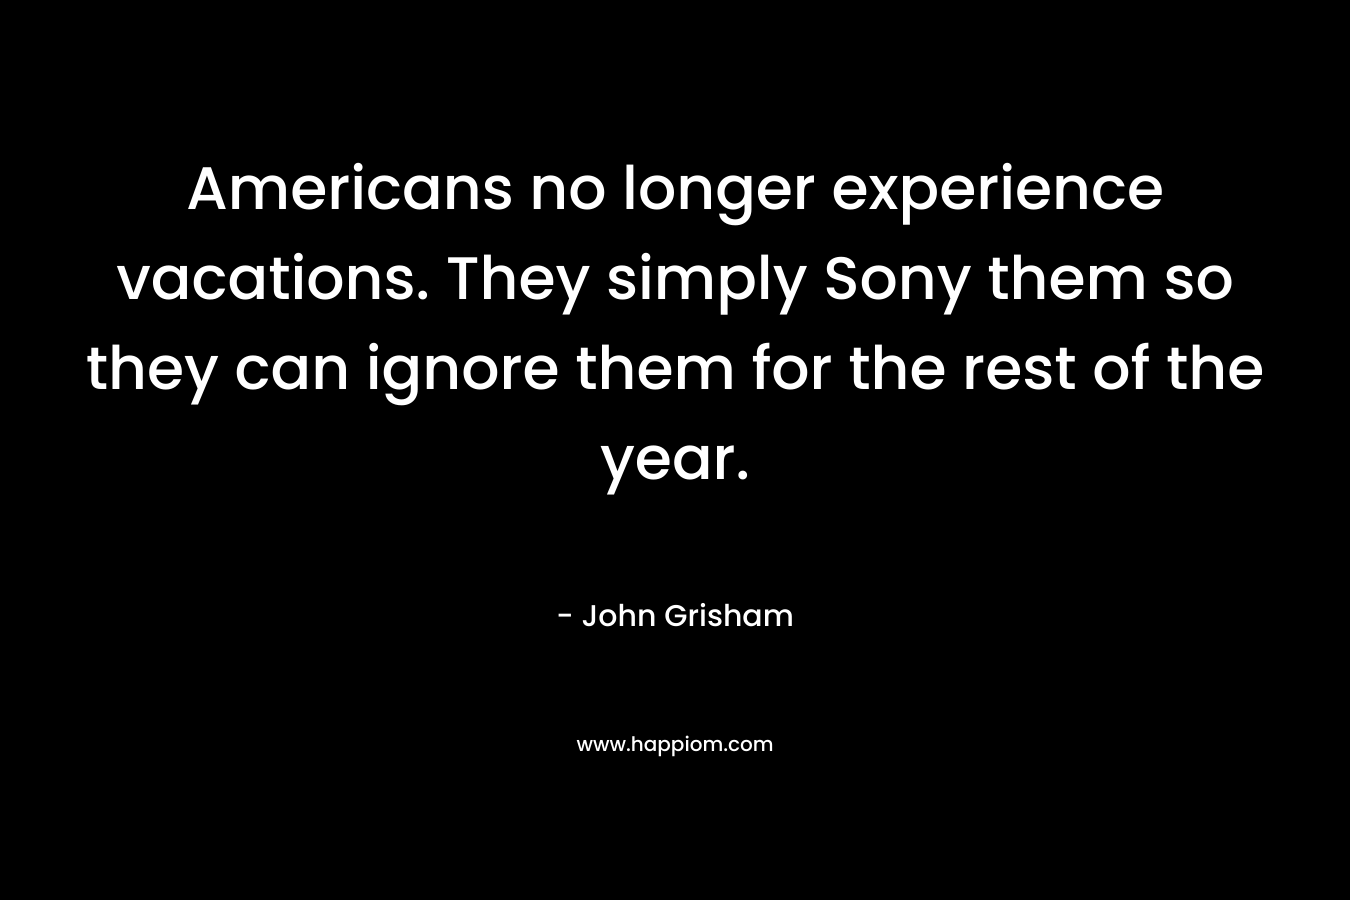 Americans no longer experience vacations. They simply Sony them so they can ignore them for the rest of the year. – John Grisham